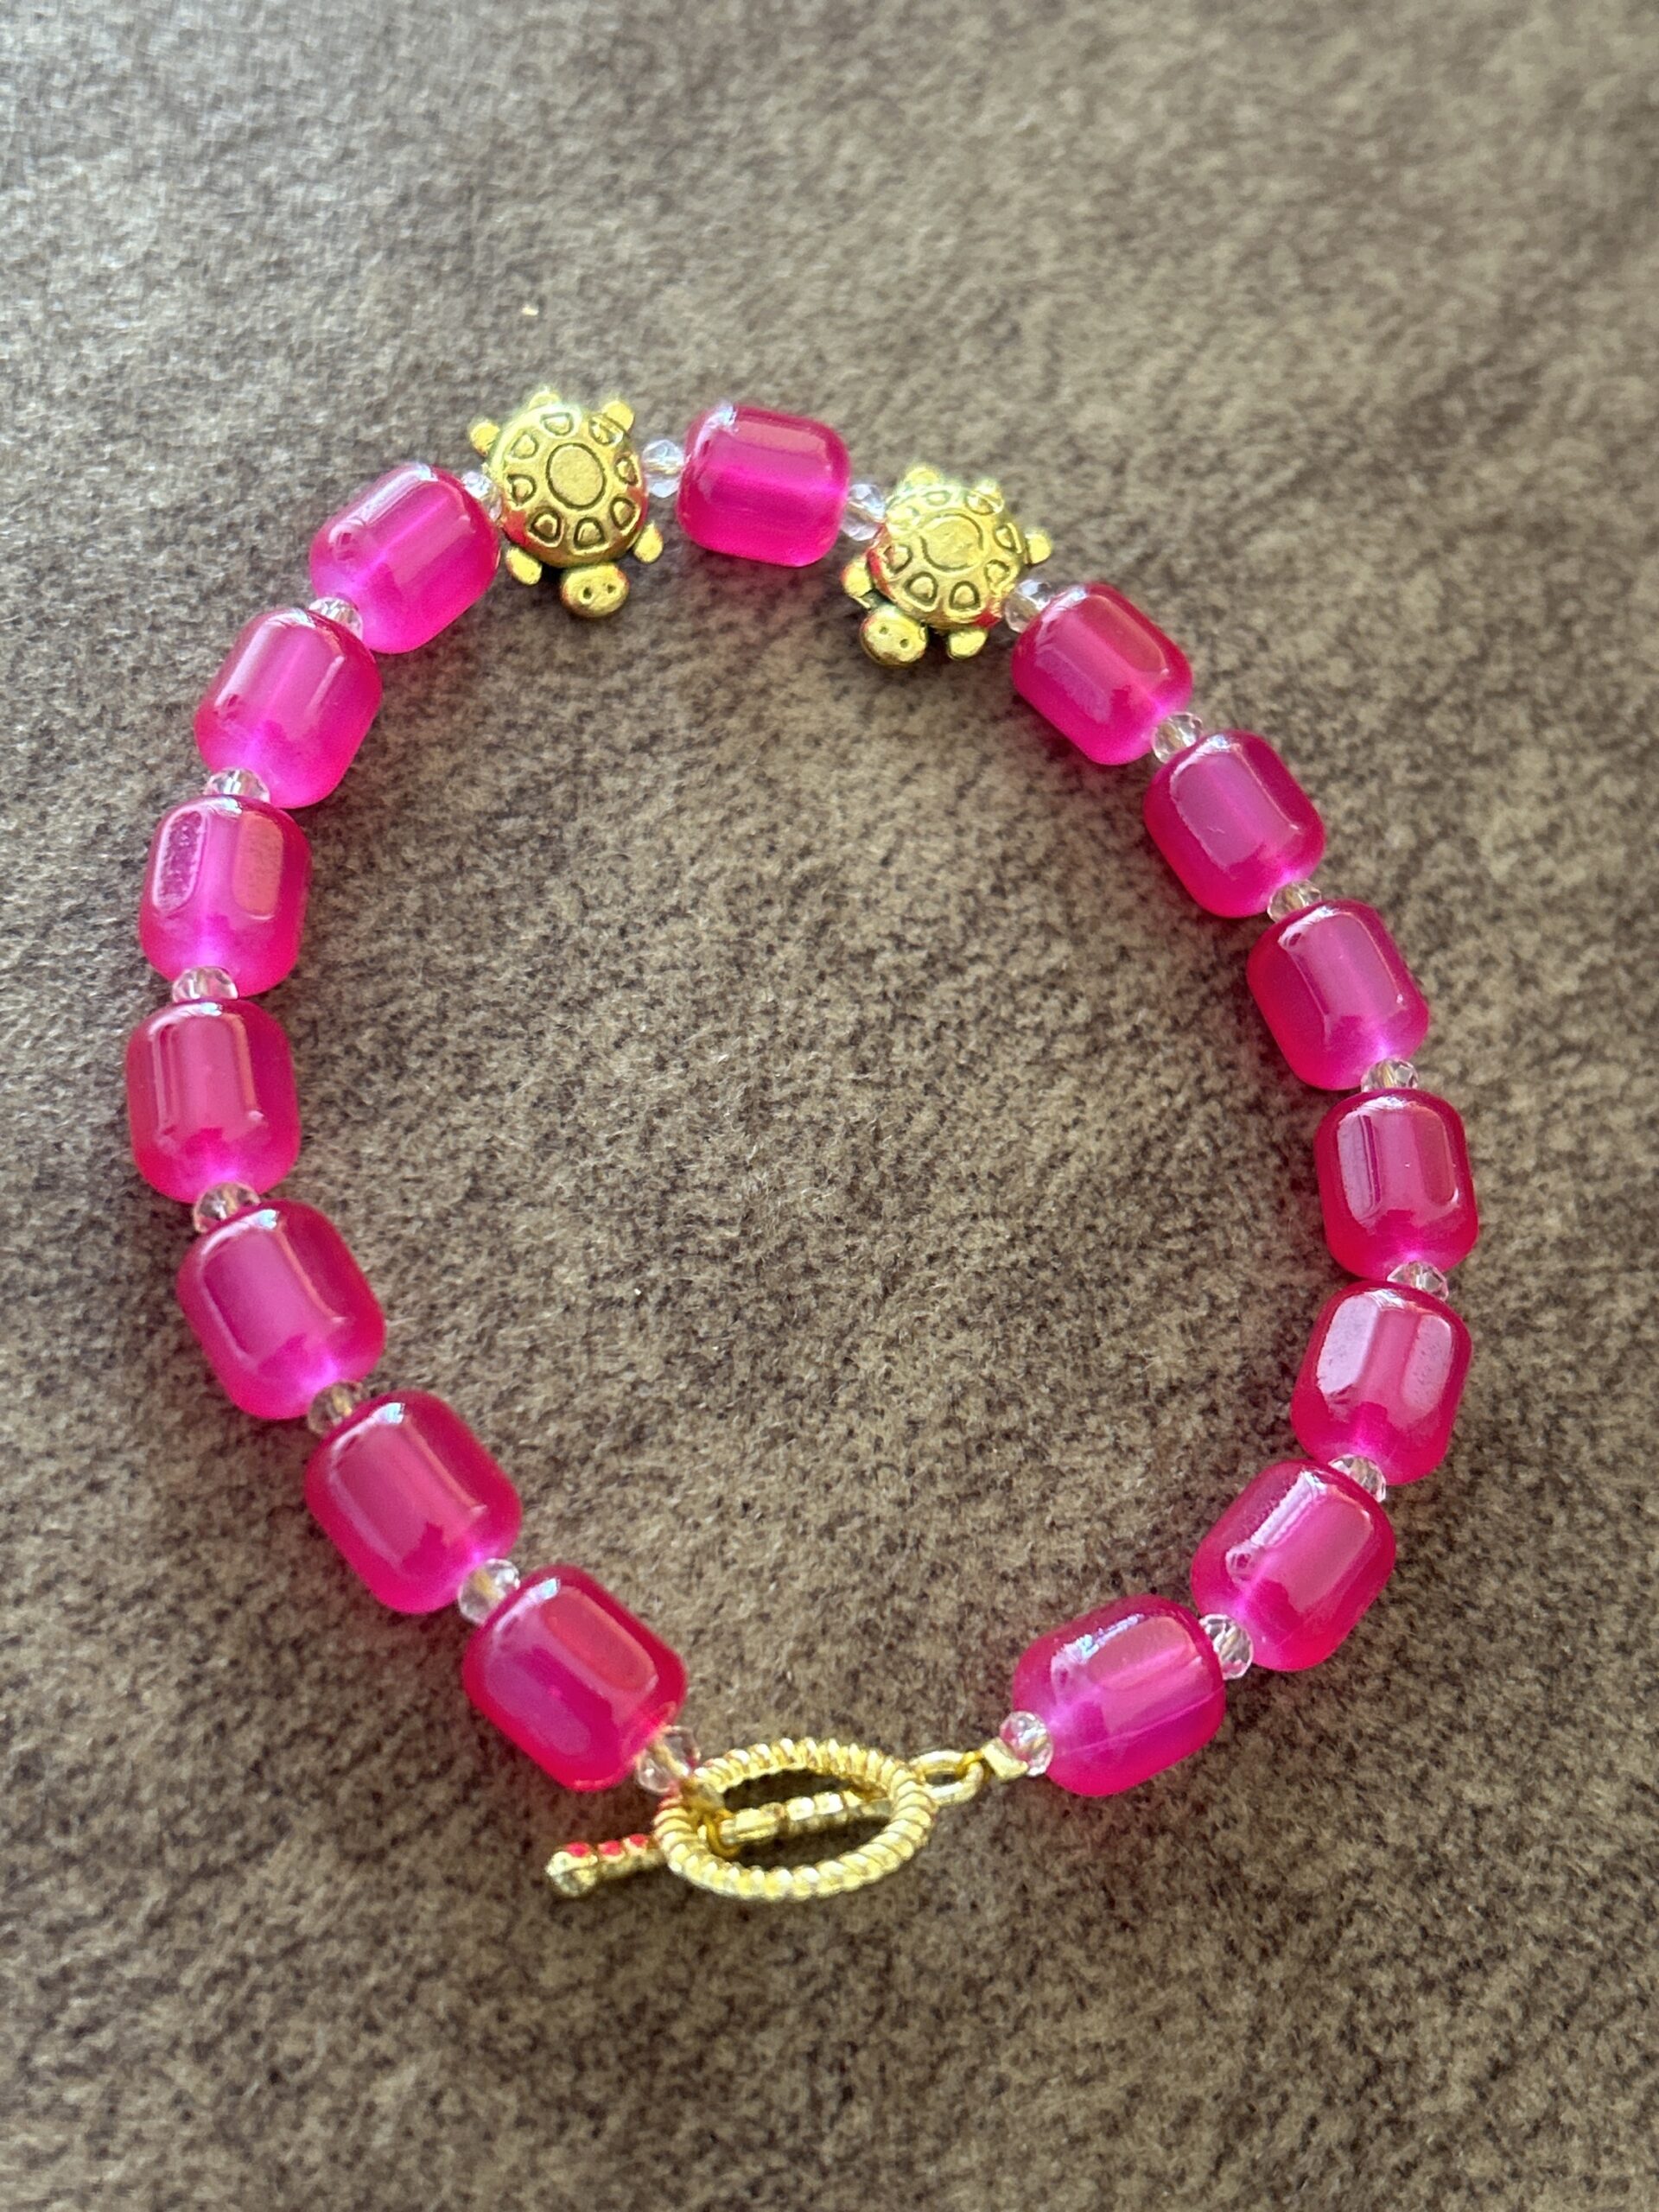 6mm Sterling Silver Bracelet with 3 6mm Hot Pink Jade – ARM CANDY COLLECTION